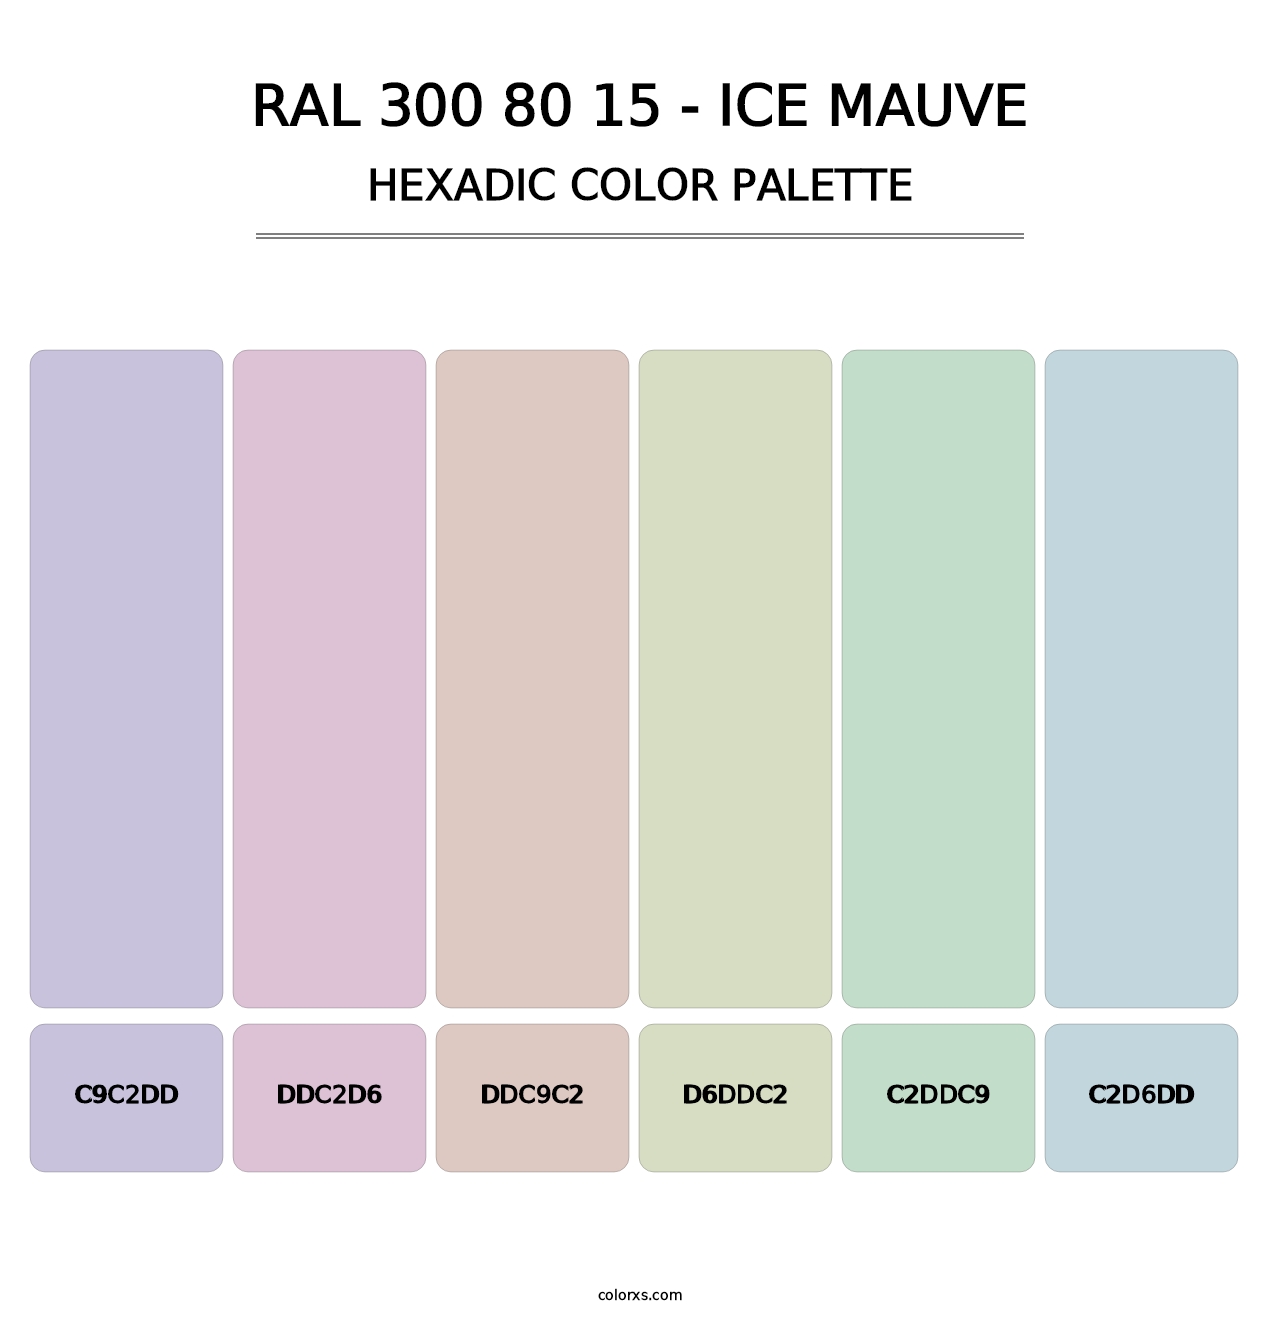 RAL 300 80 15 - Ice Mauve - Hexadic Color Palette